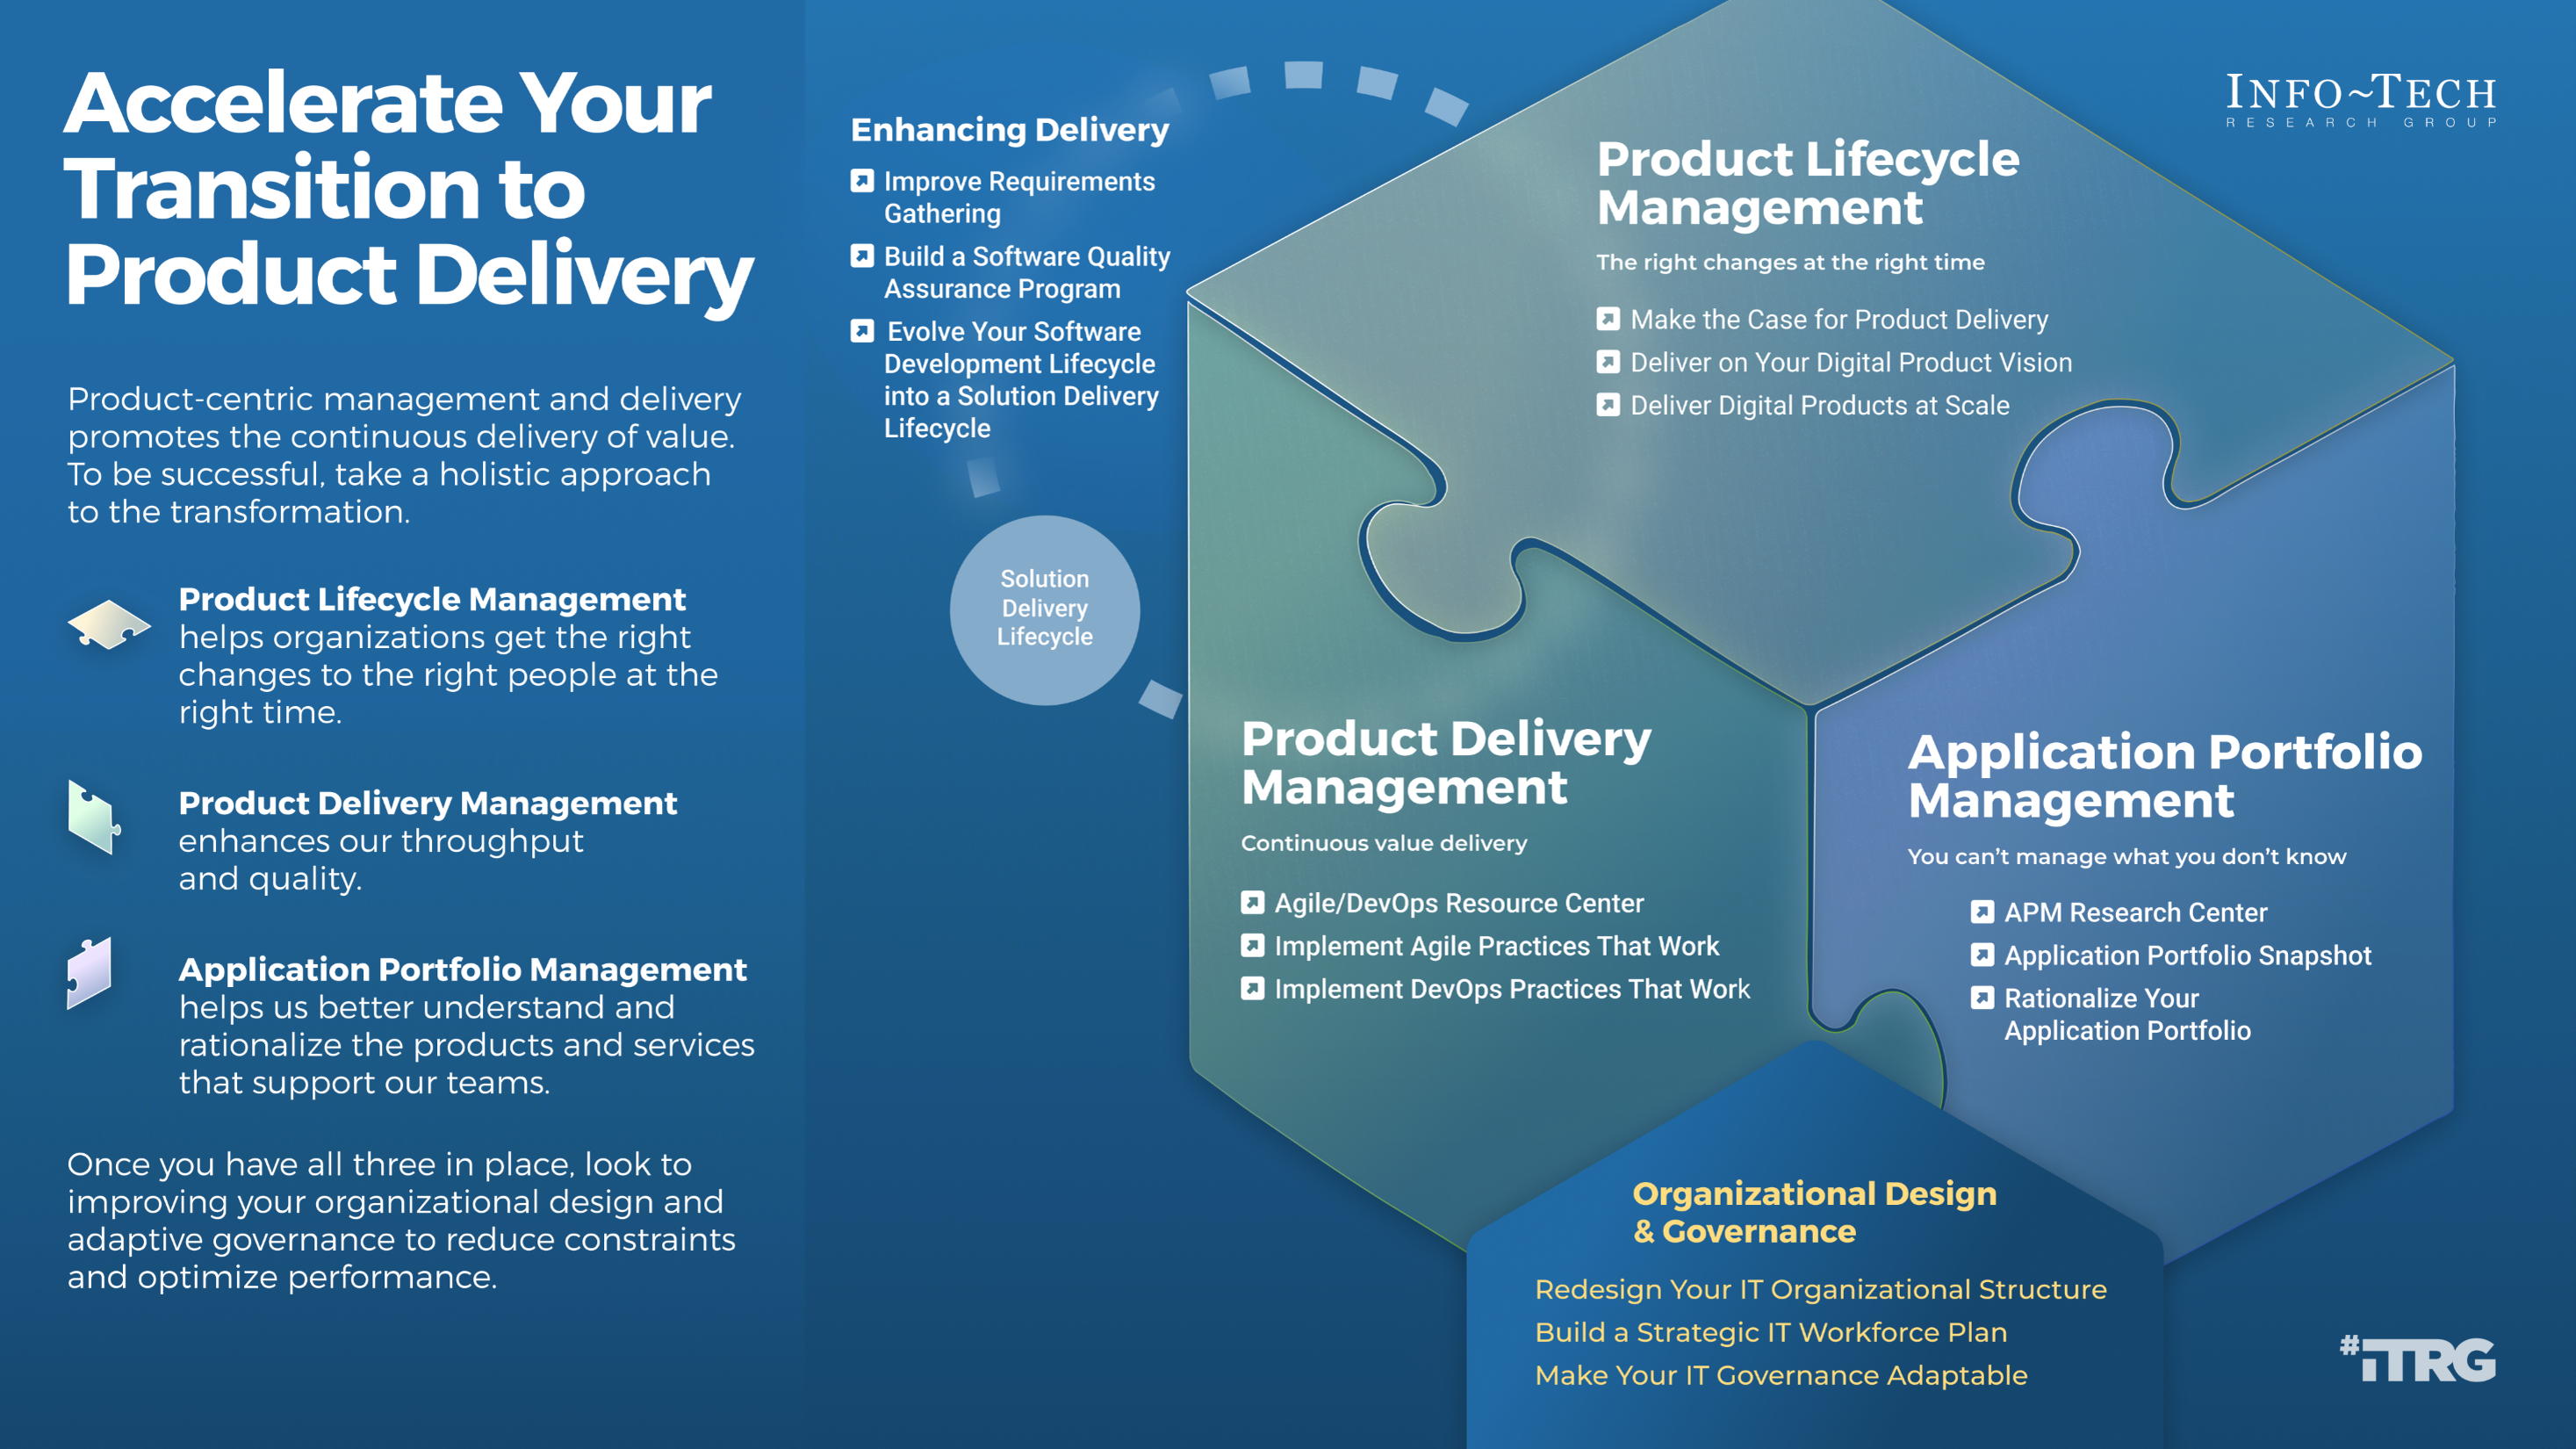 The image contains a screenshot of the thoughtmodel: Accelerate Your Transition to Product Delivery.